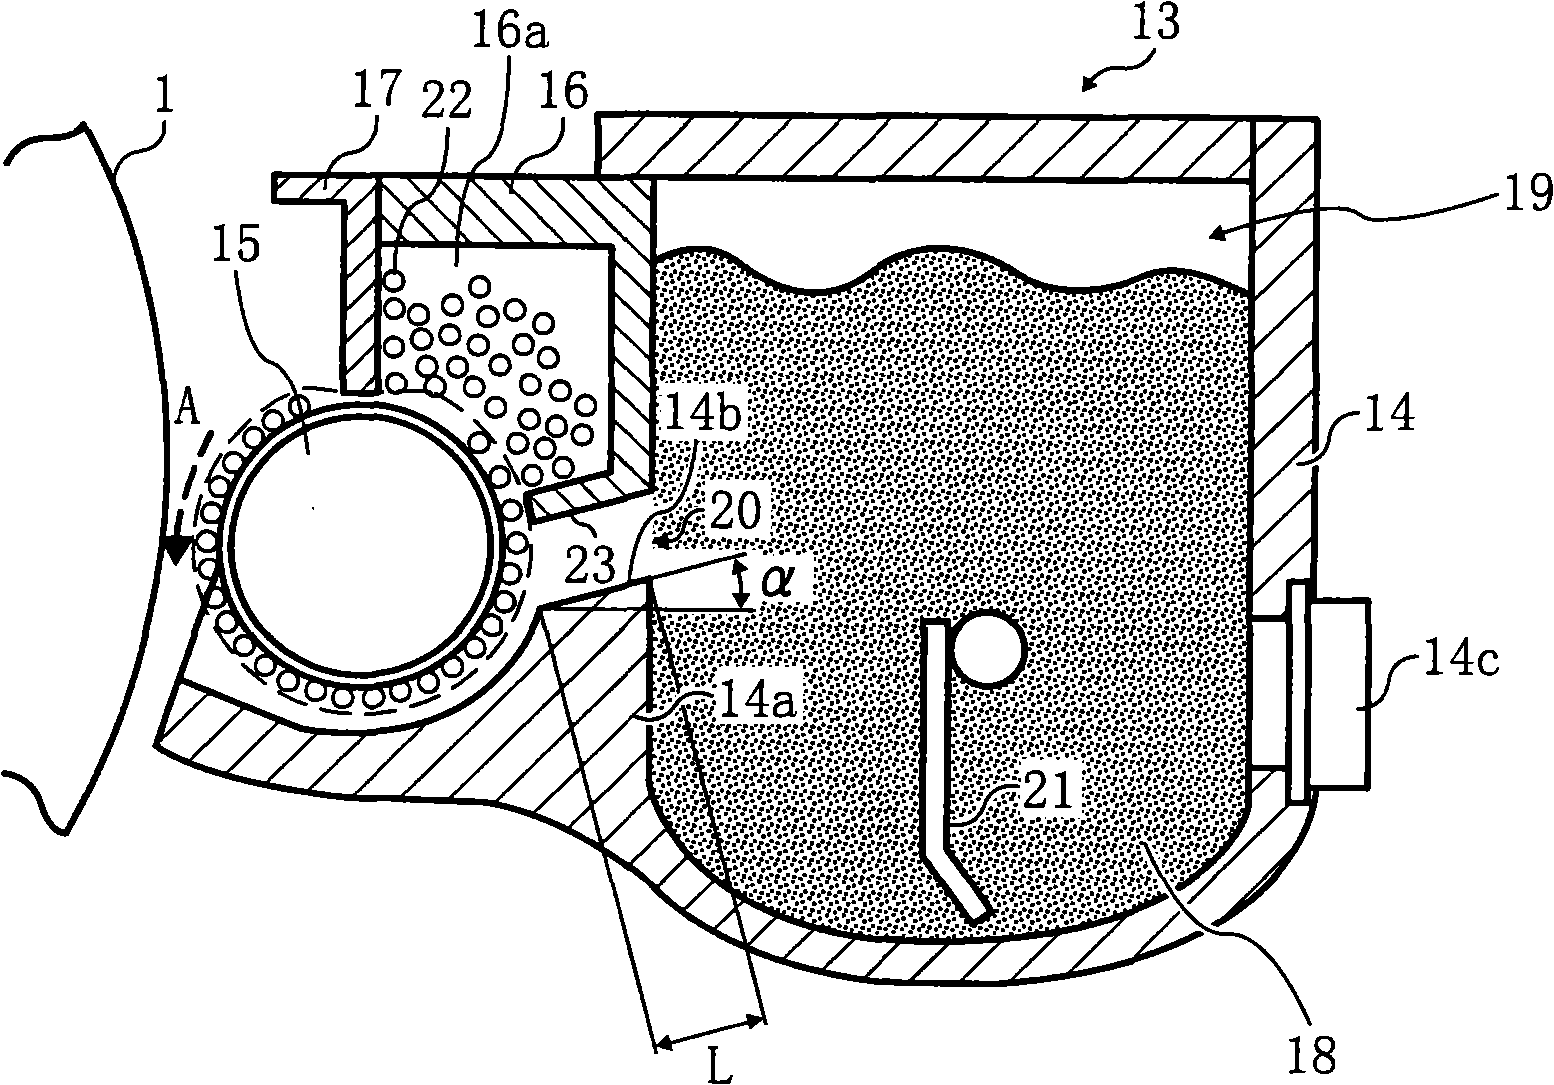 Toner, two-component developer and image forming apparatus using the toner